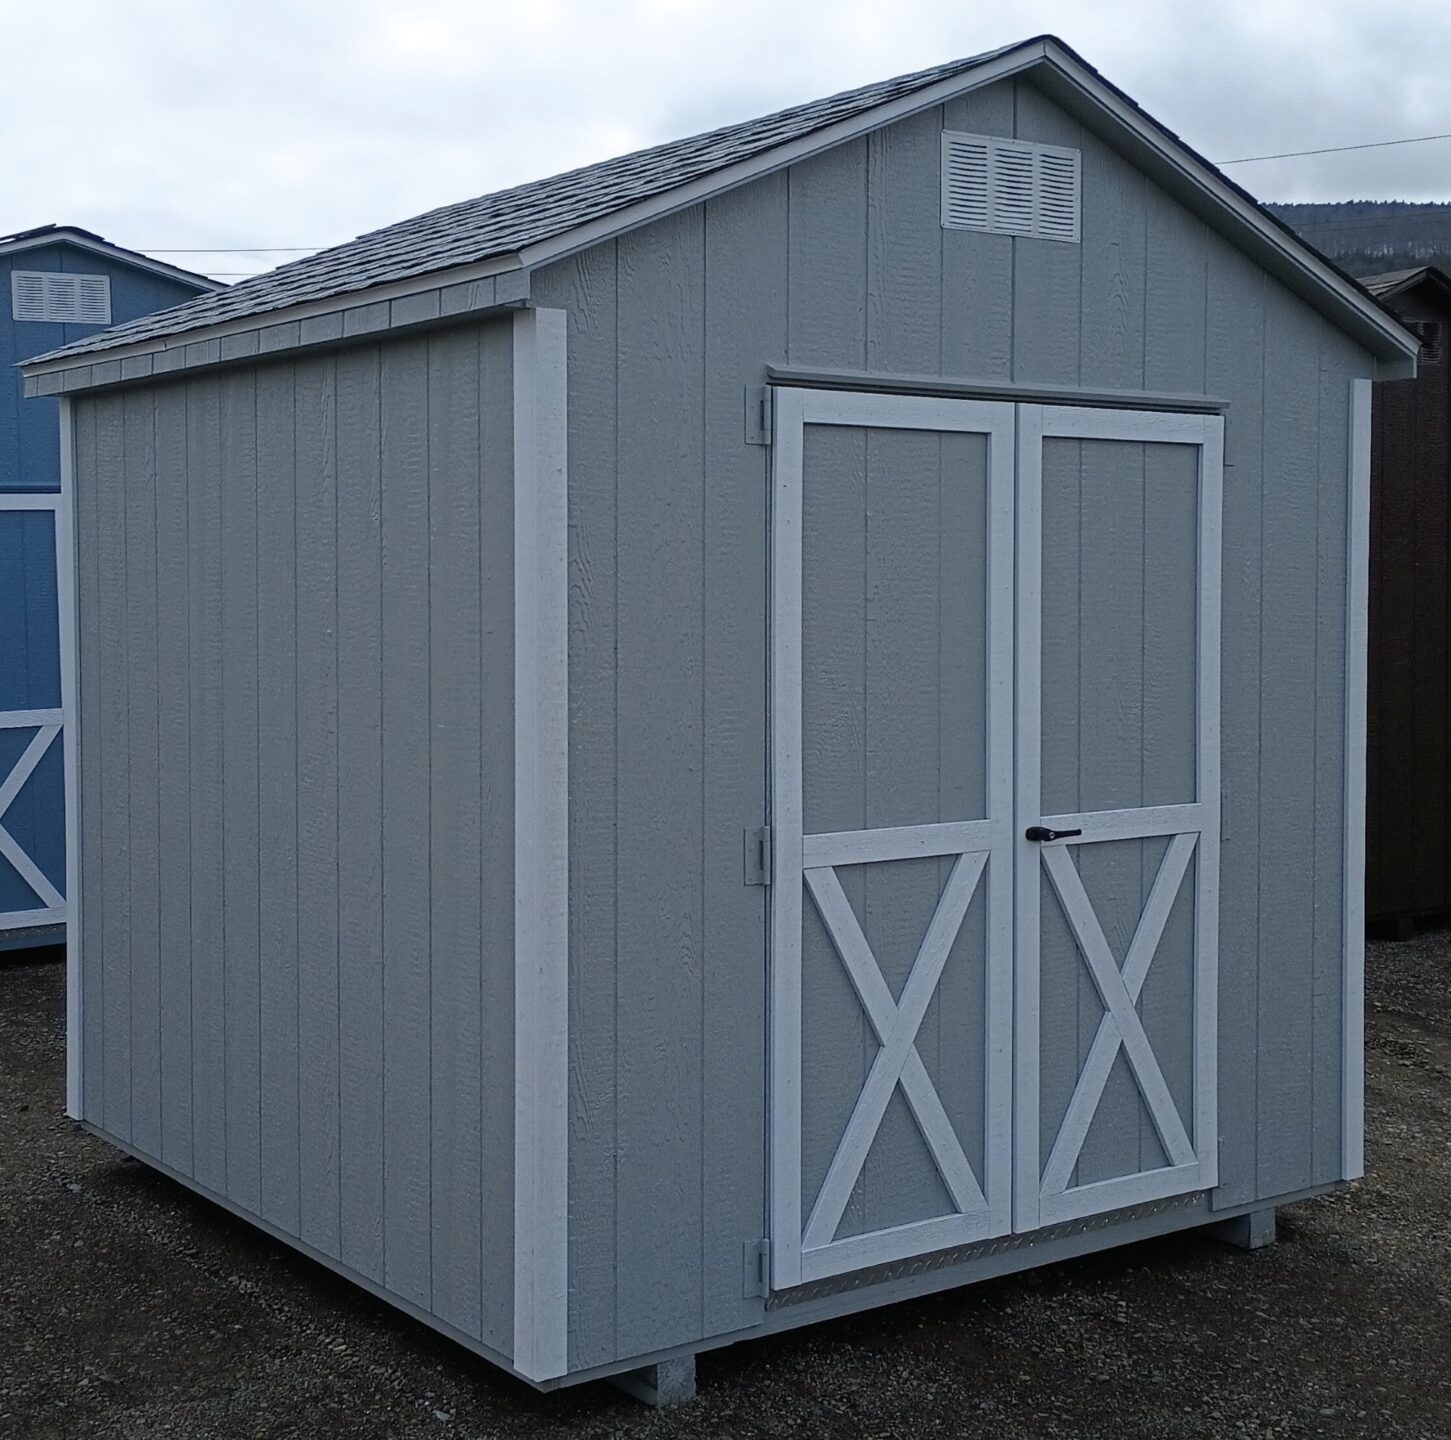 Small grey shed with white trim and double doors